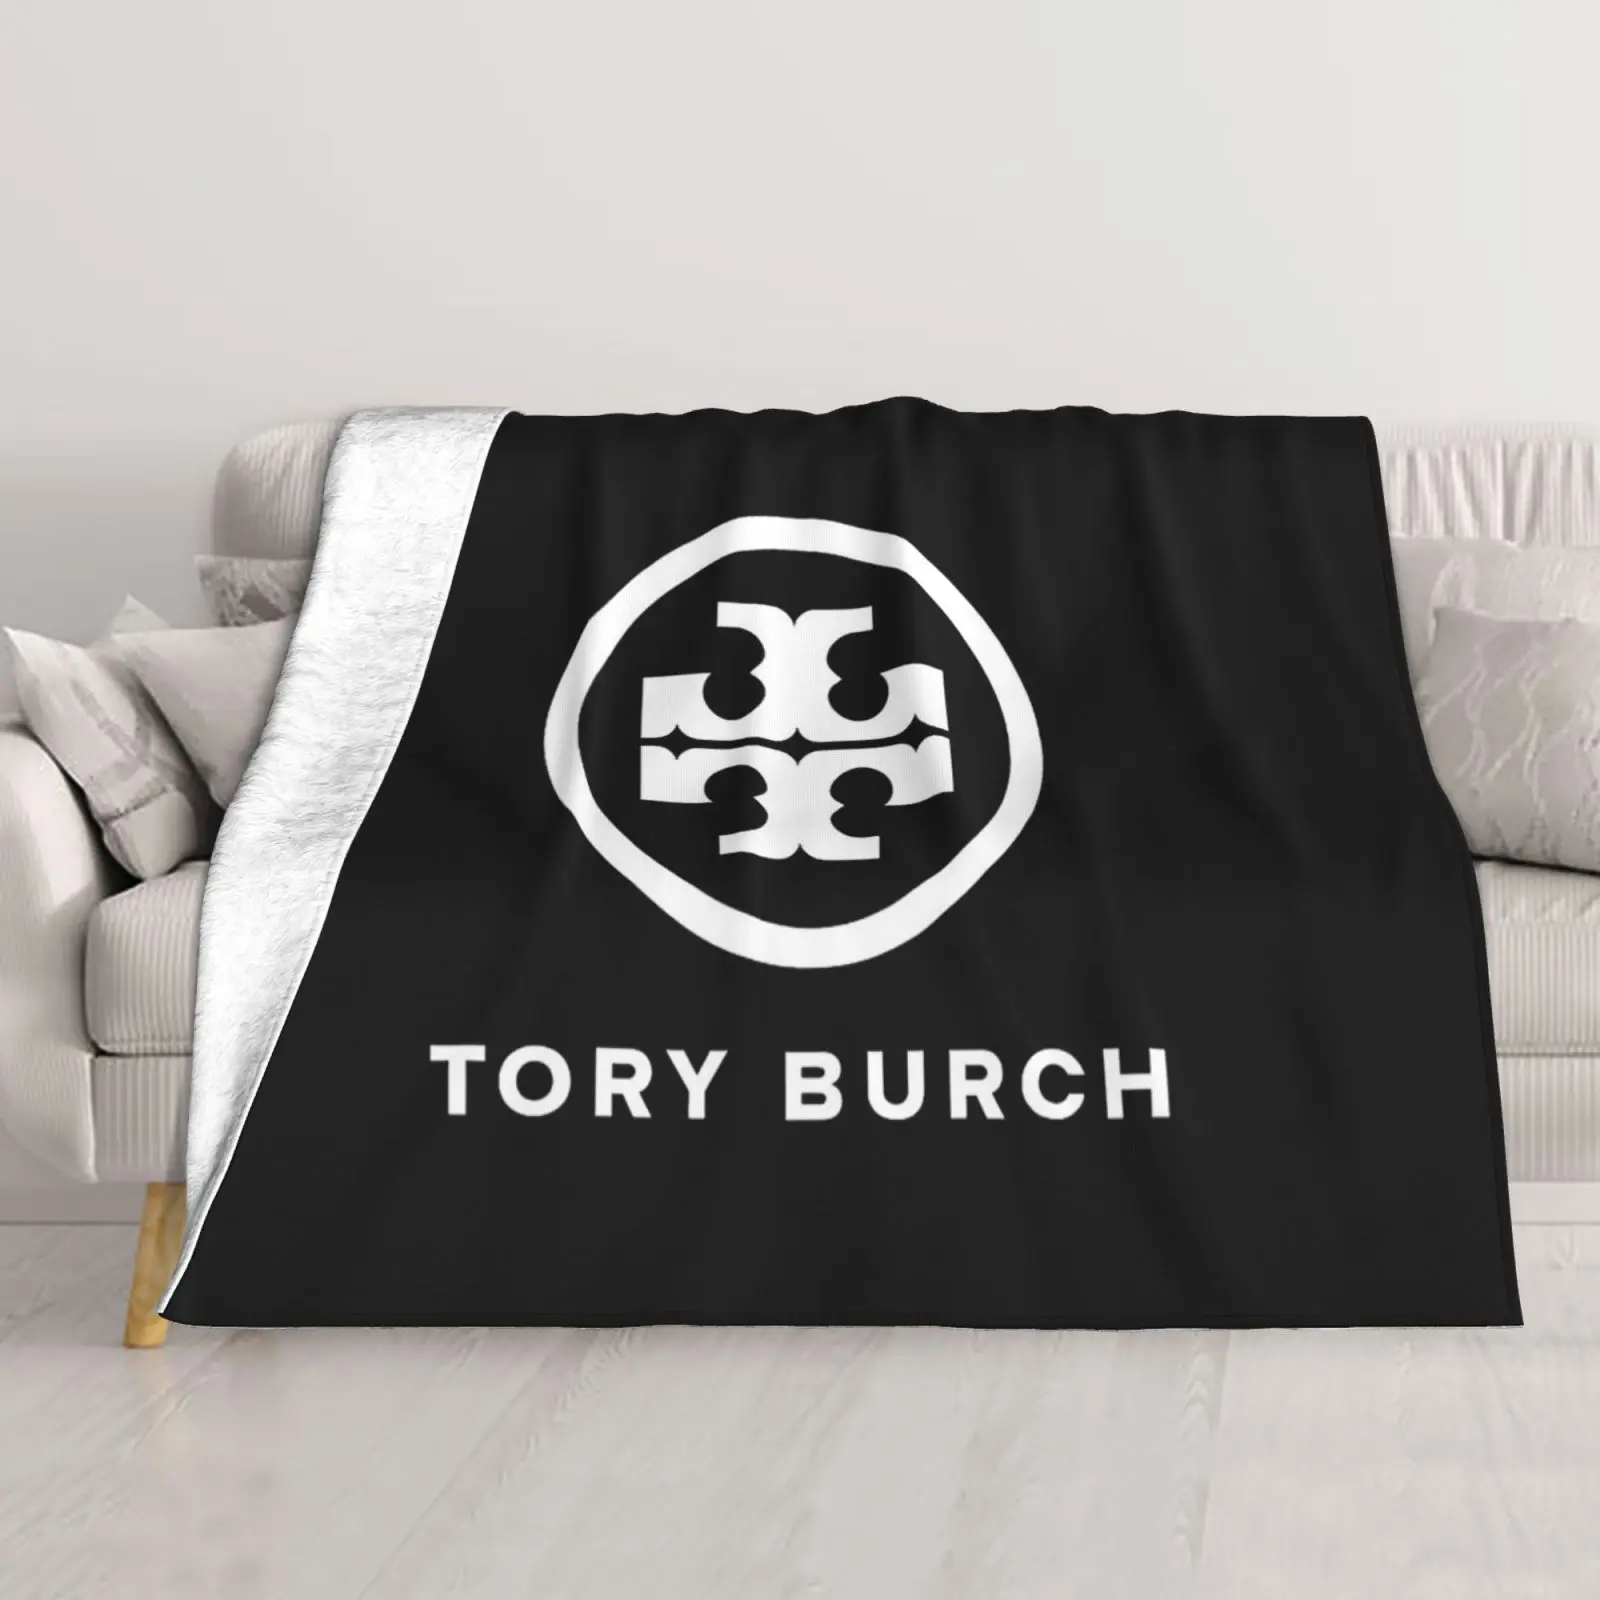 

Tory-Burch Blanket Soft Fleece Spring Autumn Warm Flannel Throw Blankets for Sofa Outdoor Bed Quilt